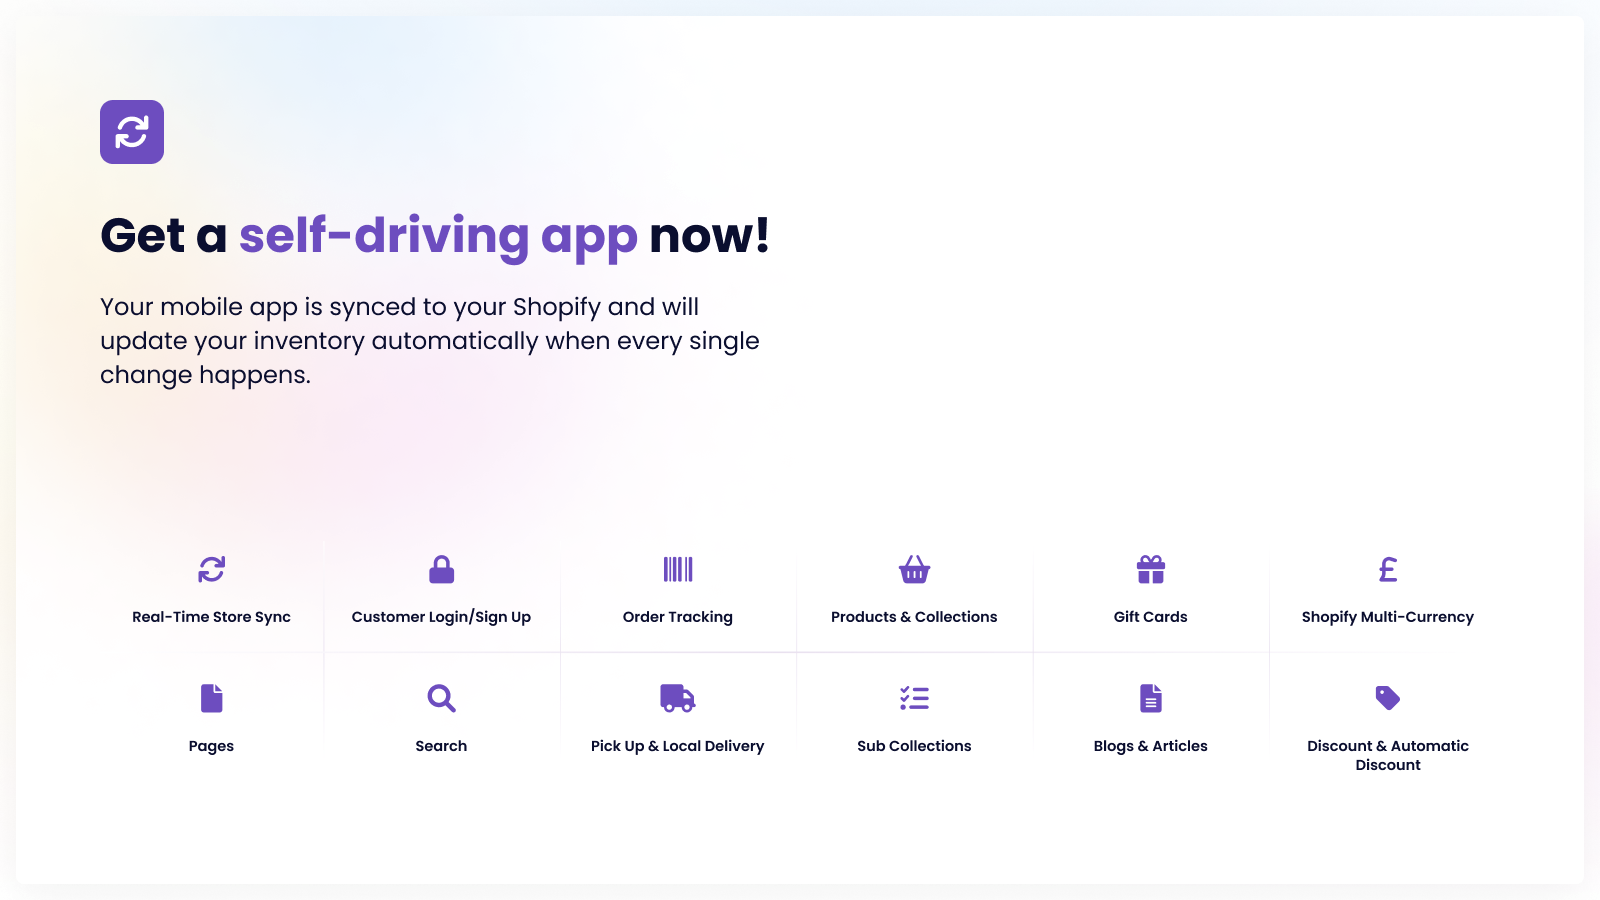 Get a self-driving app now